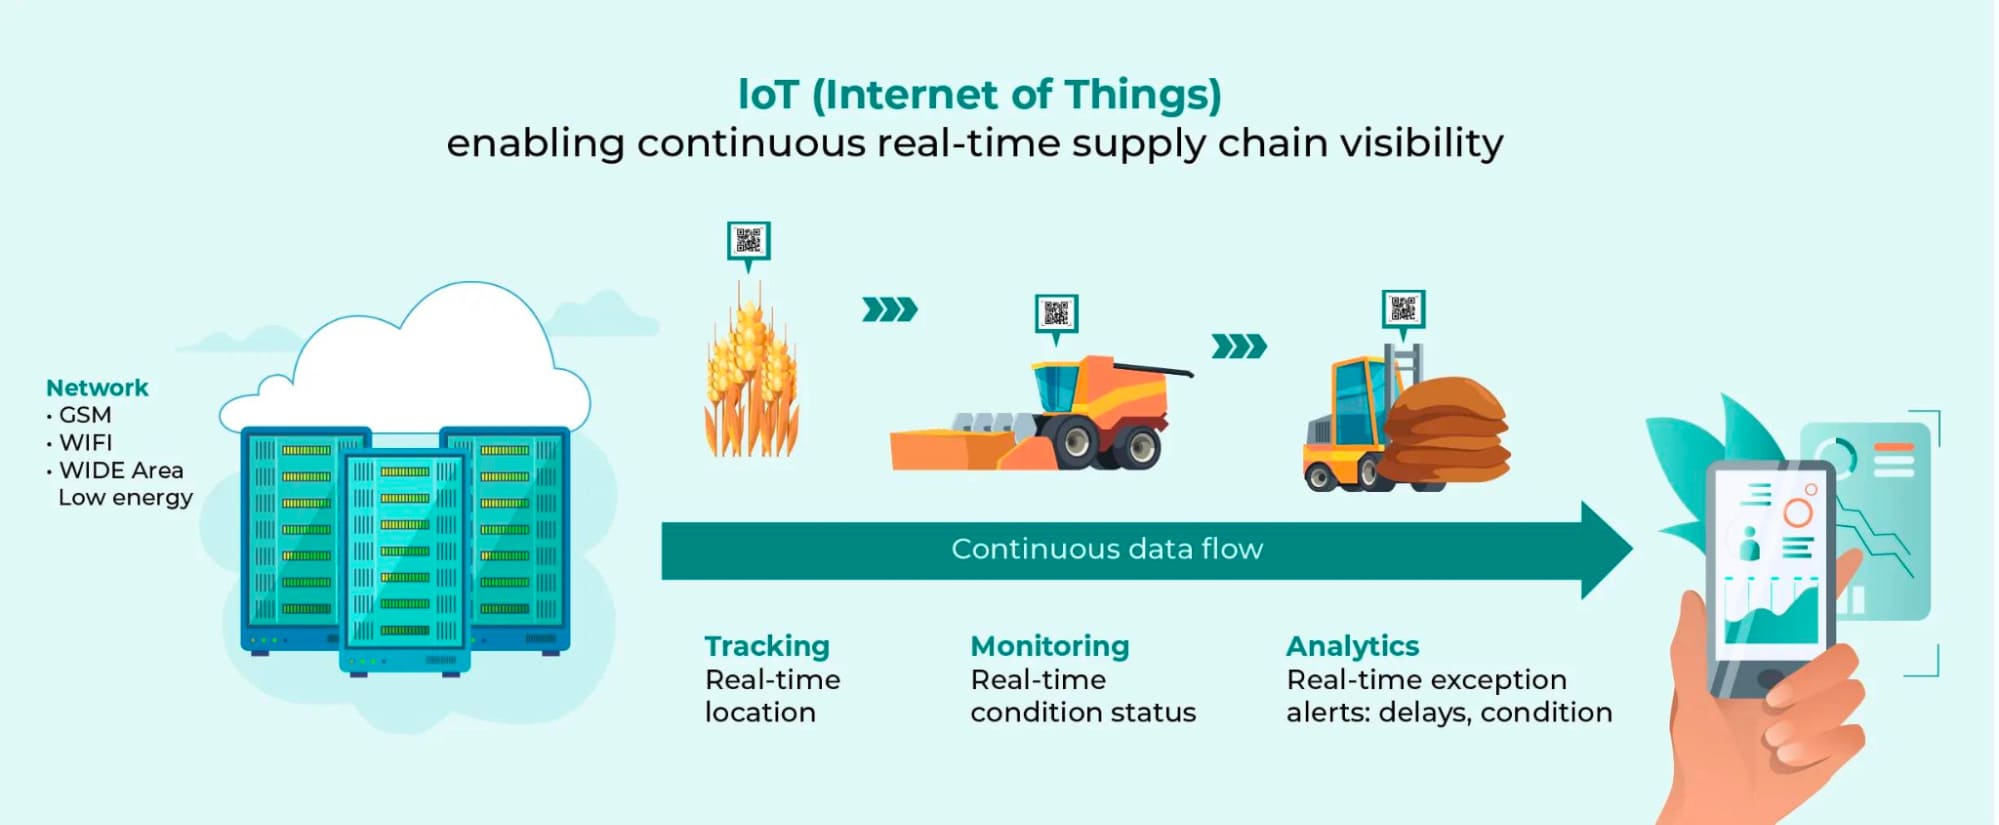 Real-time supply chain visibility